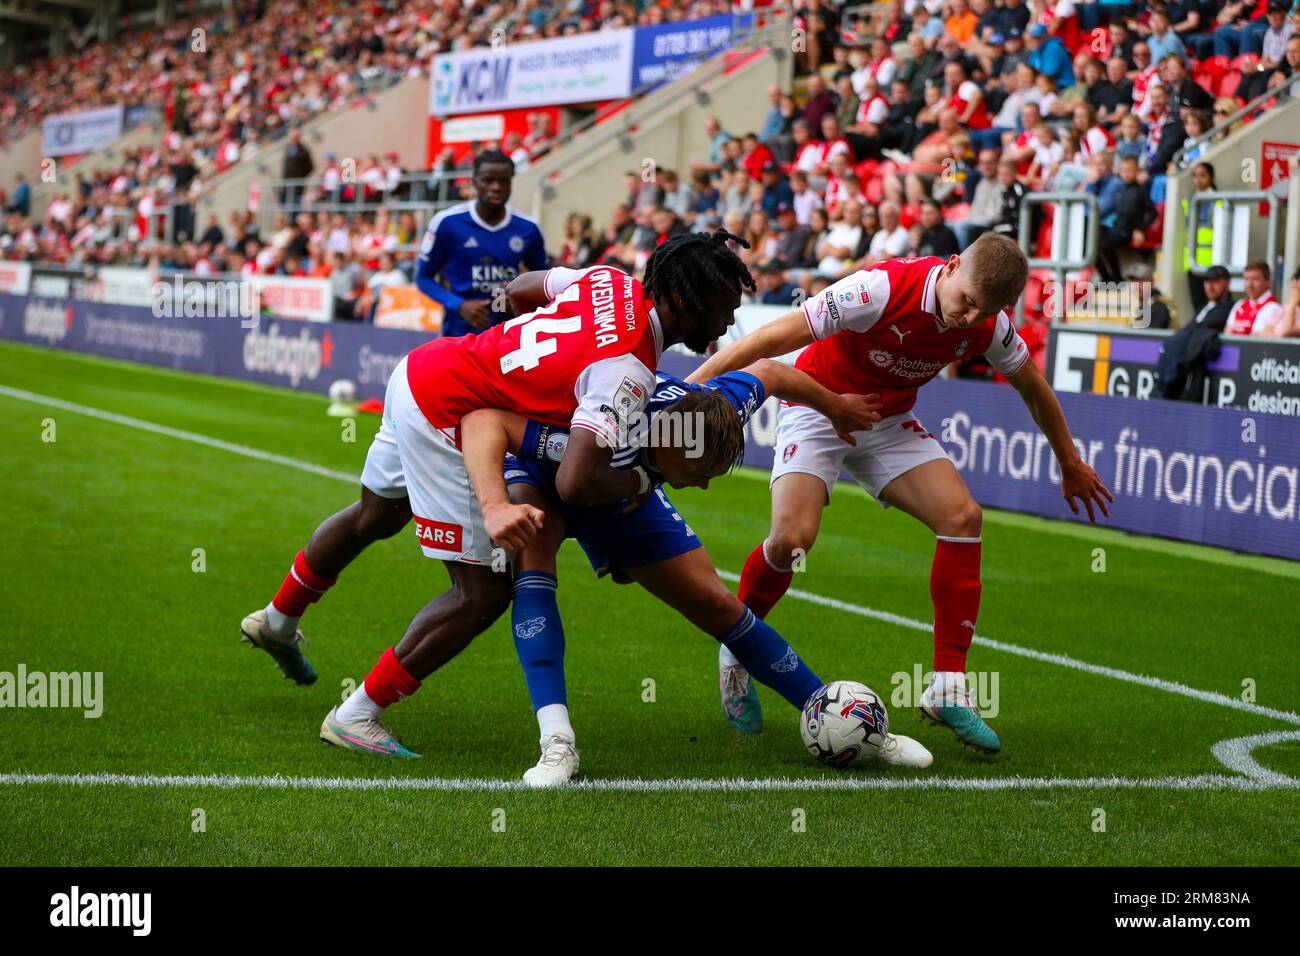 AESSEAL New York Stadium, Rotherham, England - 26th August 2023 Callum Doyle (5) of Leicester City shields the ball from Fred Onyedinma (14) of Rotherham United and Ciaran McGuckin (35) of Rotherham United - during the game Rotherham United v Leicester City, Sky Bet Championship,  2023/24, AESSEAL New York Stadium, Rotherham, England - 26th August 2023 Credit: Mathew Marsden/WhiteRosePhotos/Alamy Live News Stock Photo